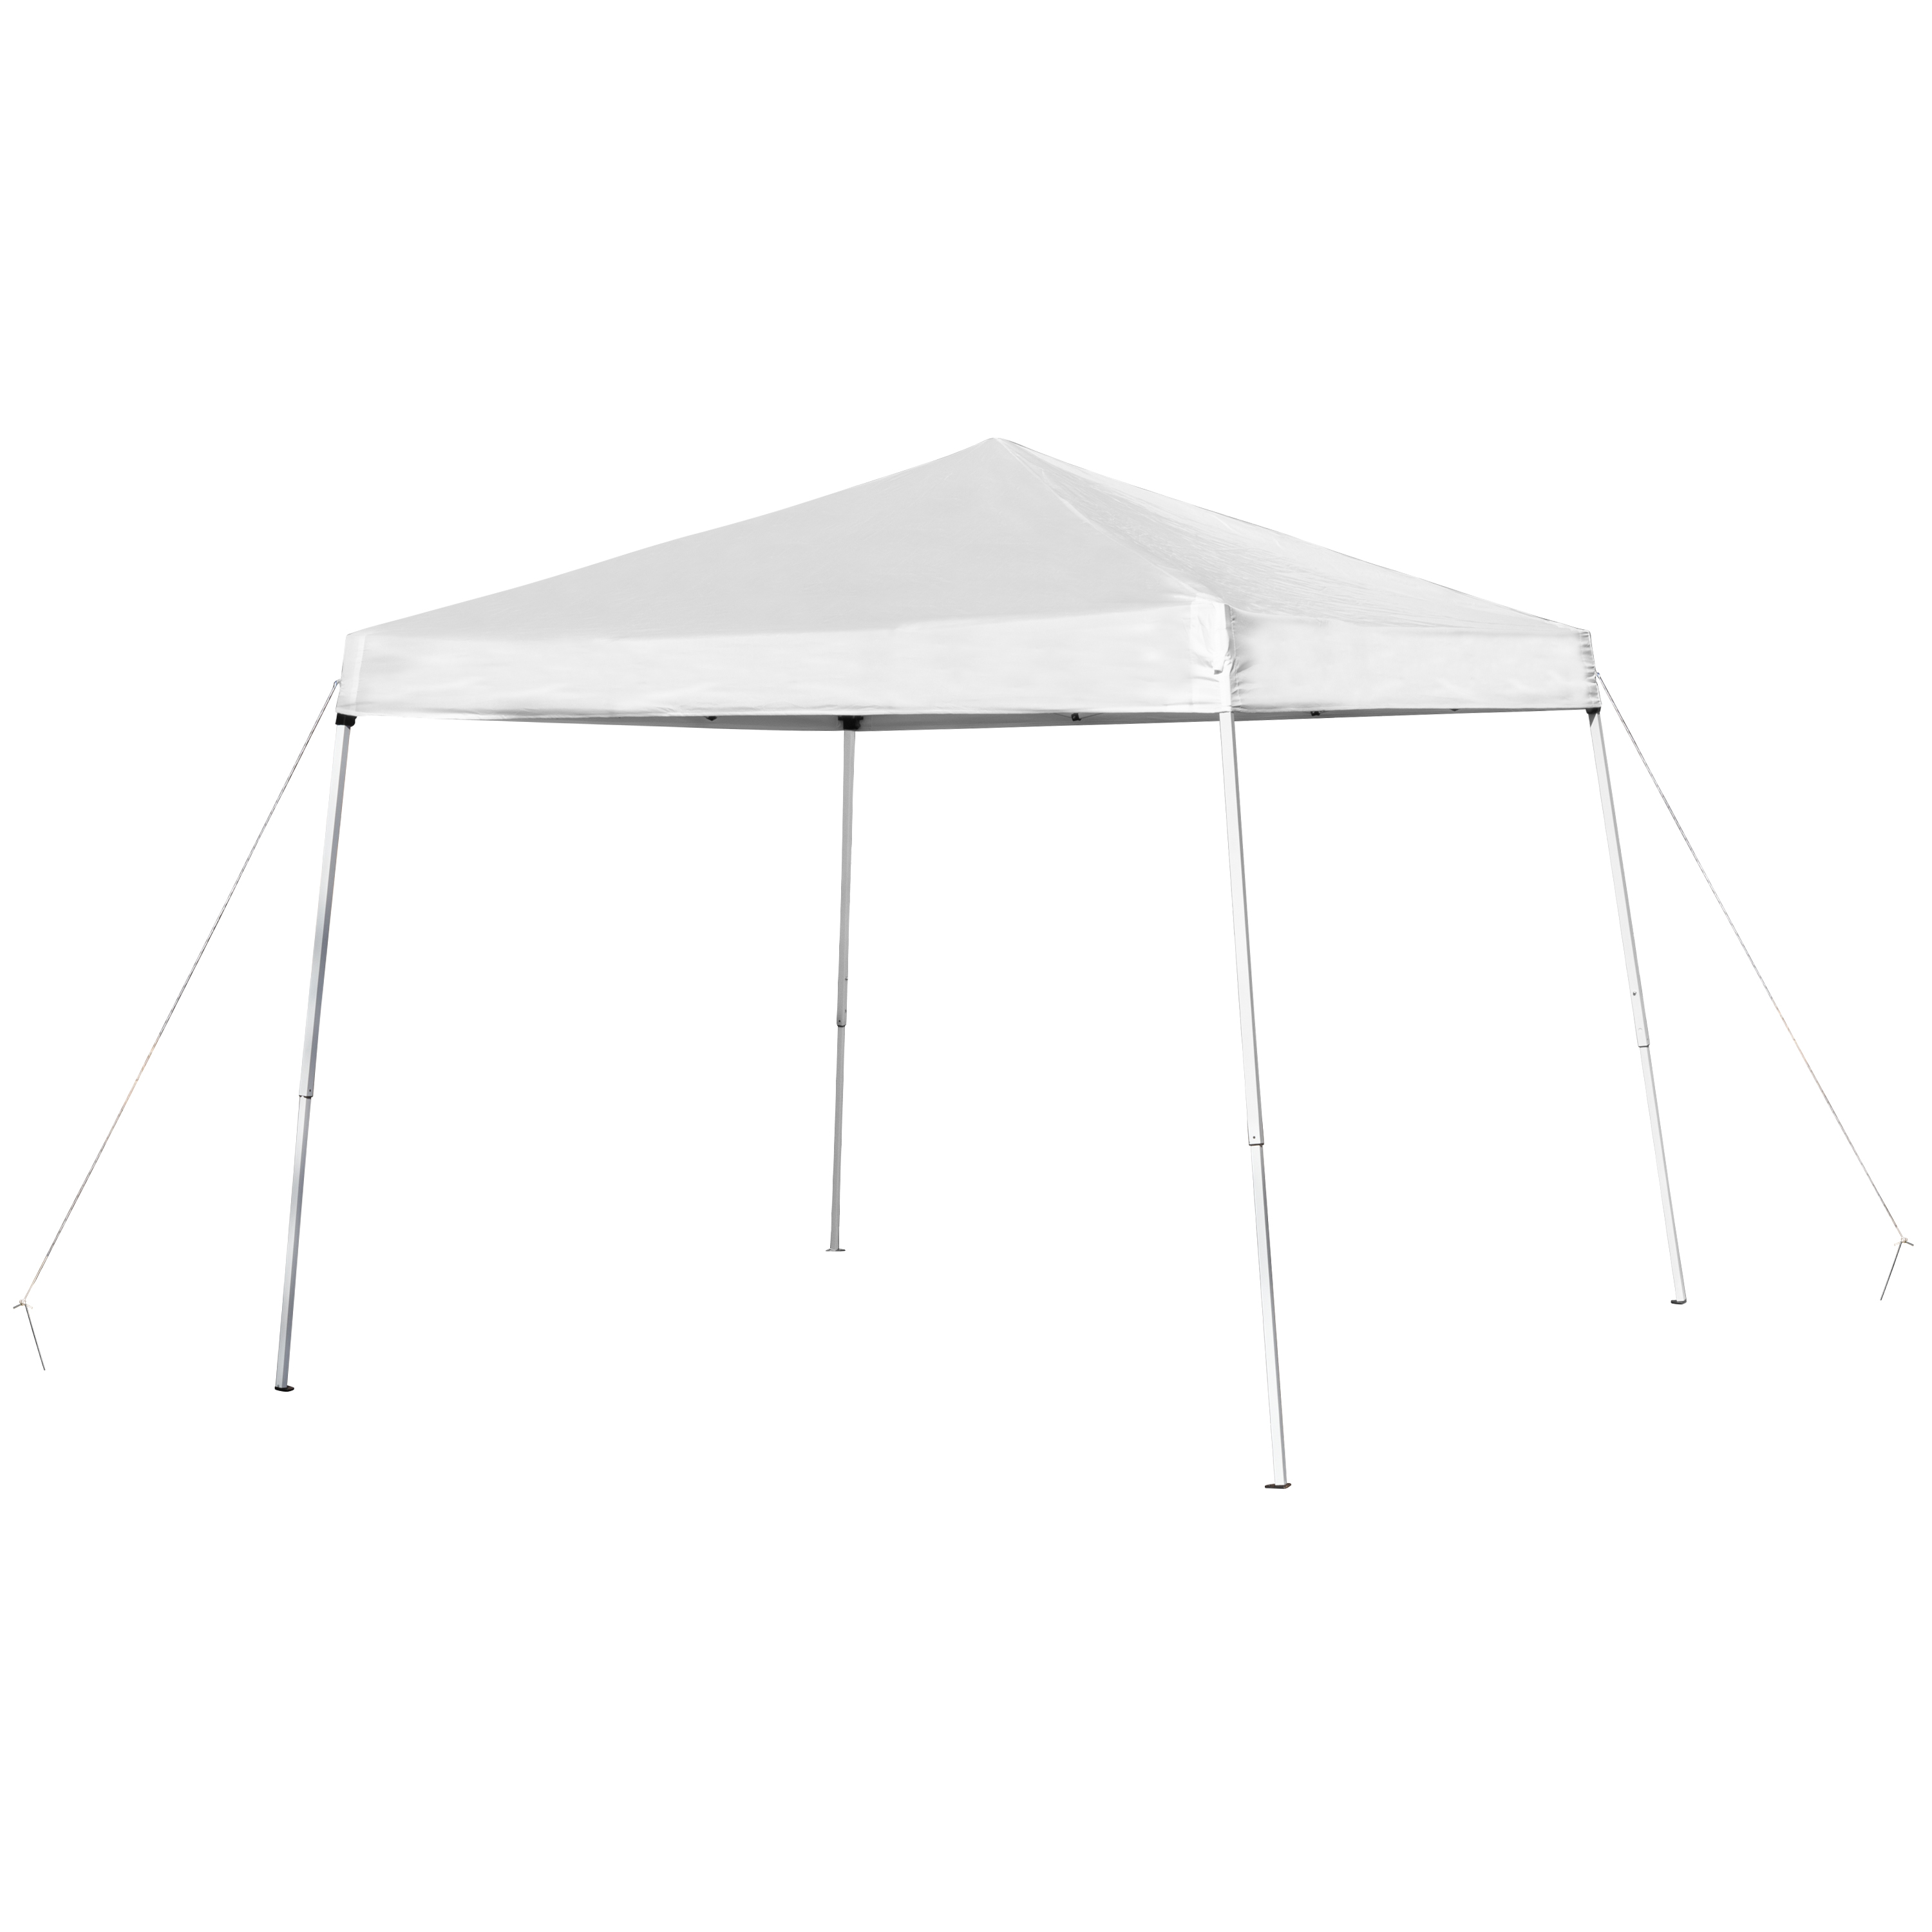 Flash Furniture JJ-GZ88-WH-GG 8' x 8' White Outdoor Pop Up Slanted Leg Canopy Tent with Carry Bag